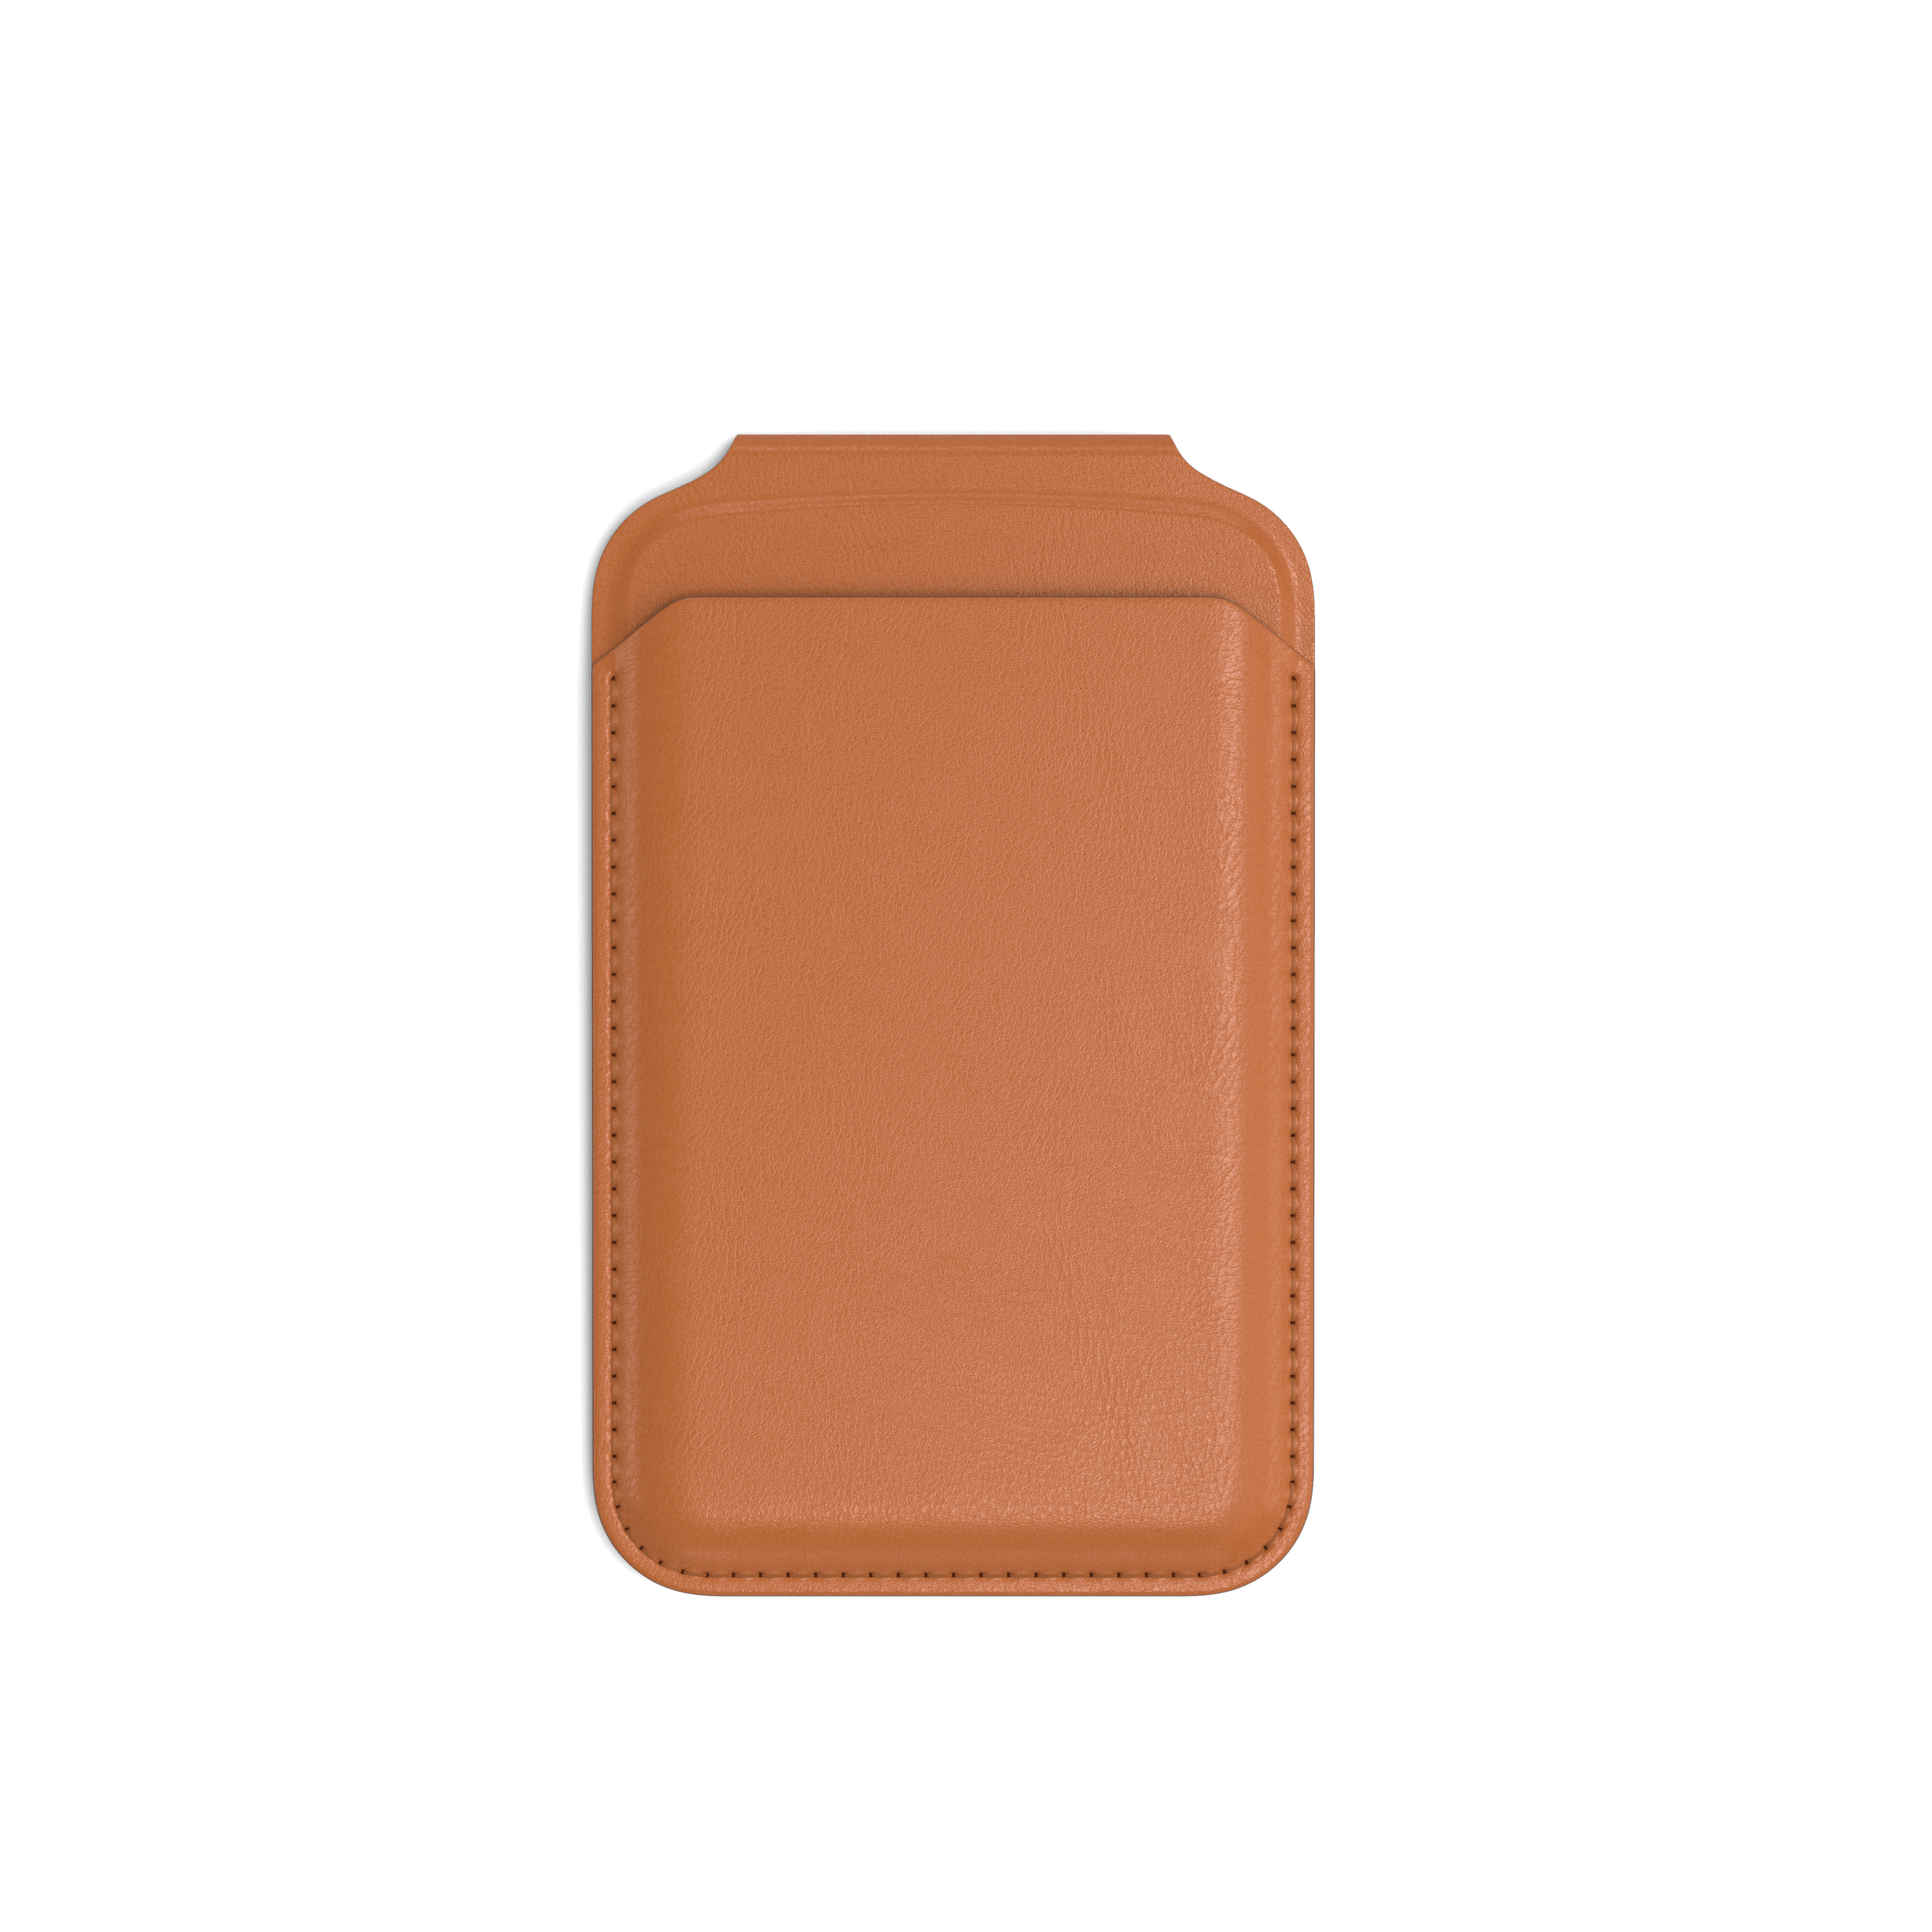 Satechi Vegan Leather Magnetic Wallet Stand (Brown)